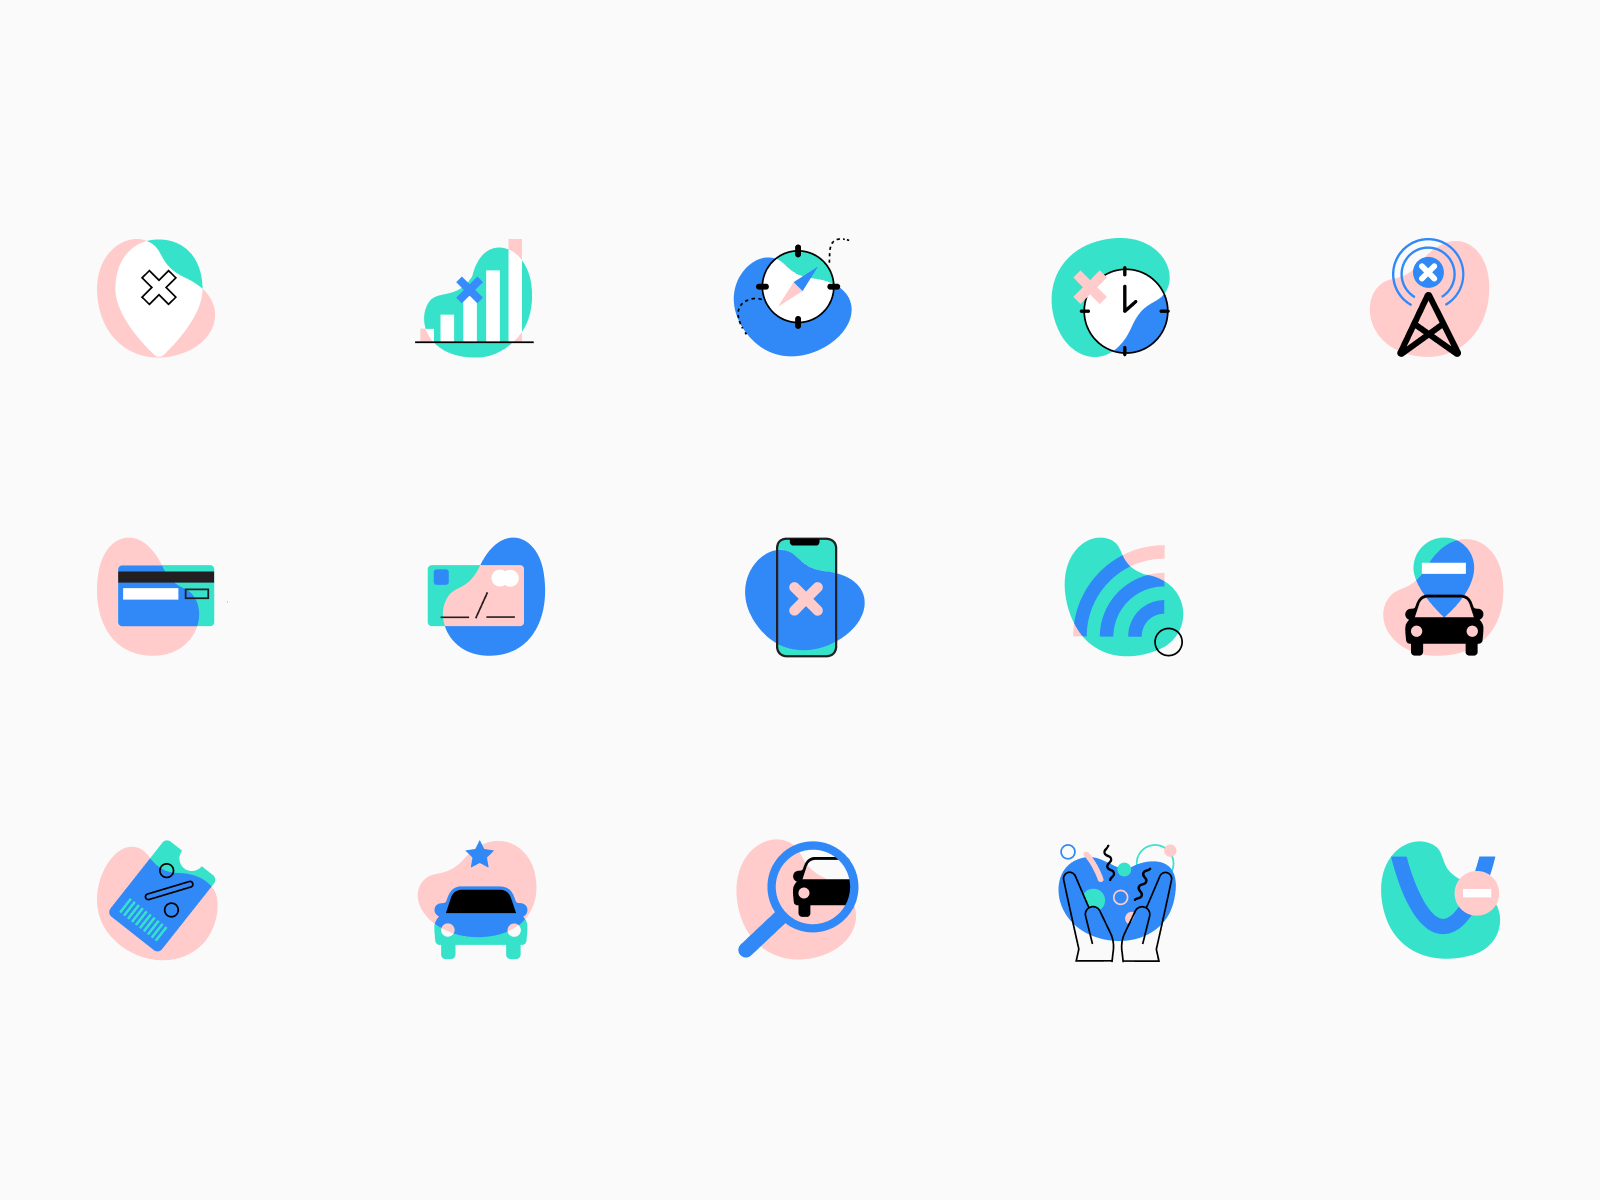 Vertt Mobile Application Icons icon set mobile design app design graphics user experience design icon design service driving ride sharing icons illustration web user experience interaction design studio interface ui ux graphic design design